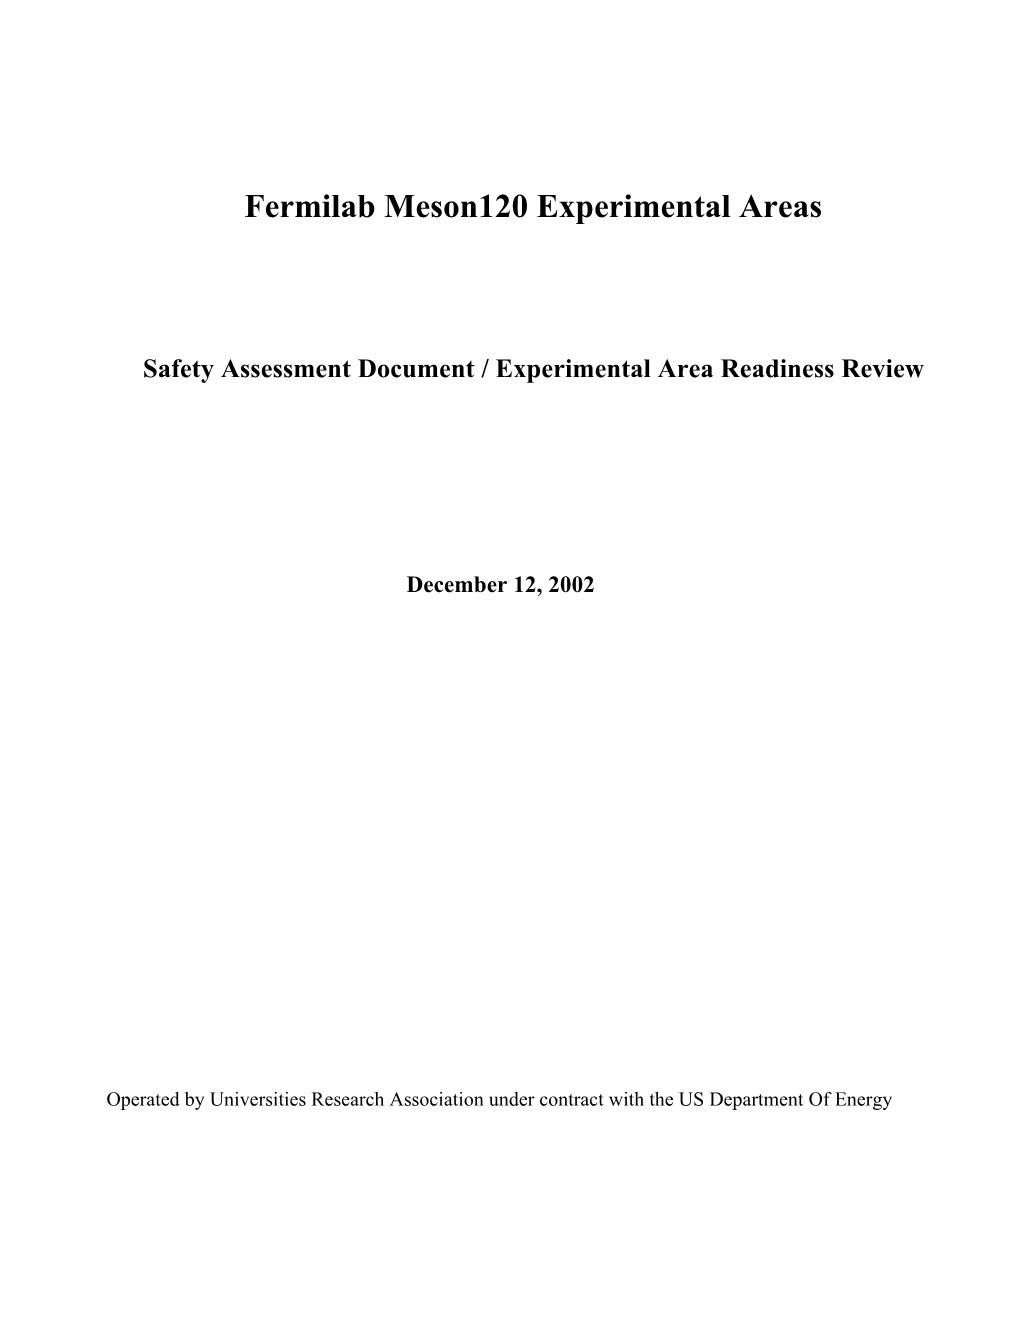 Safety Assessment Document / Experimental Area Readiness Review